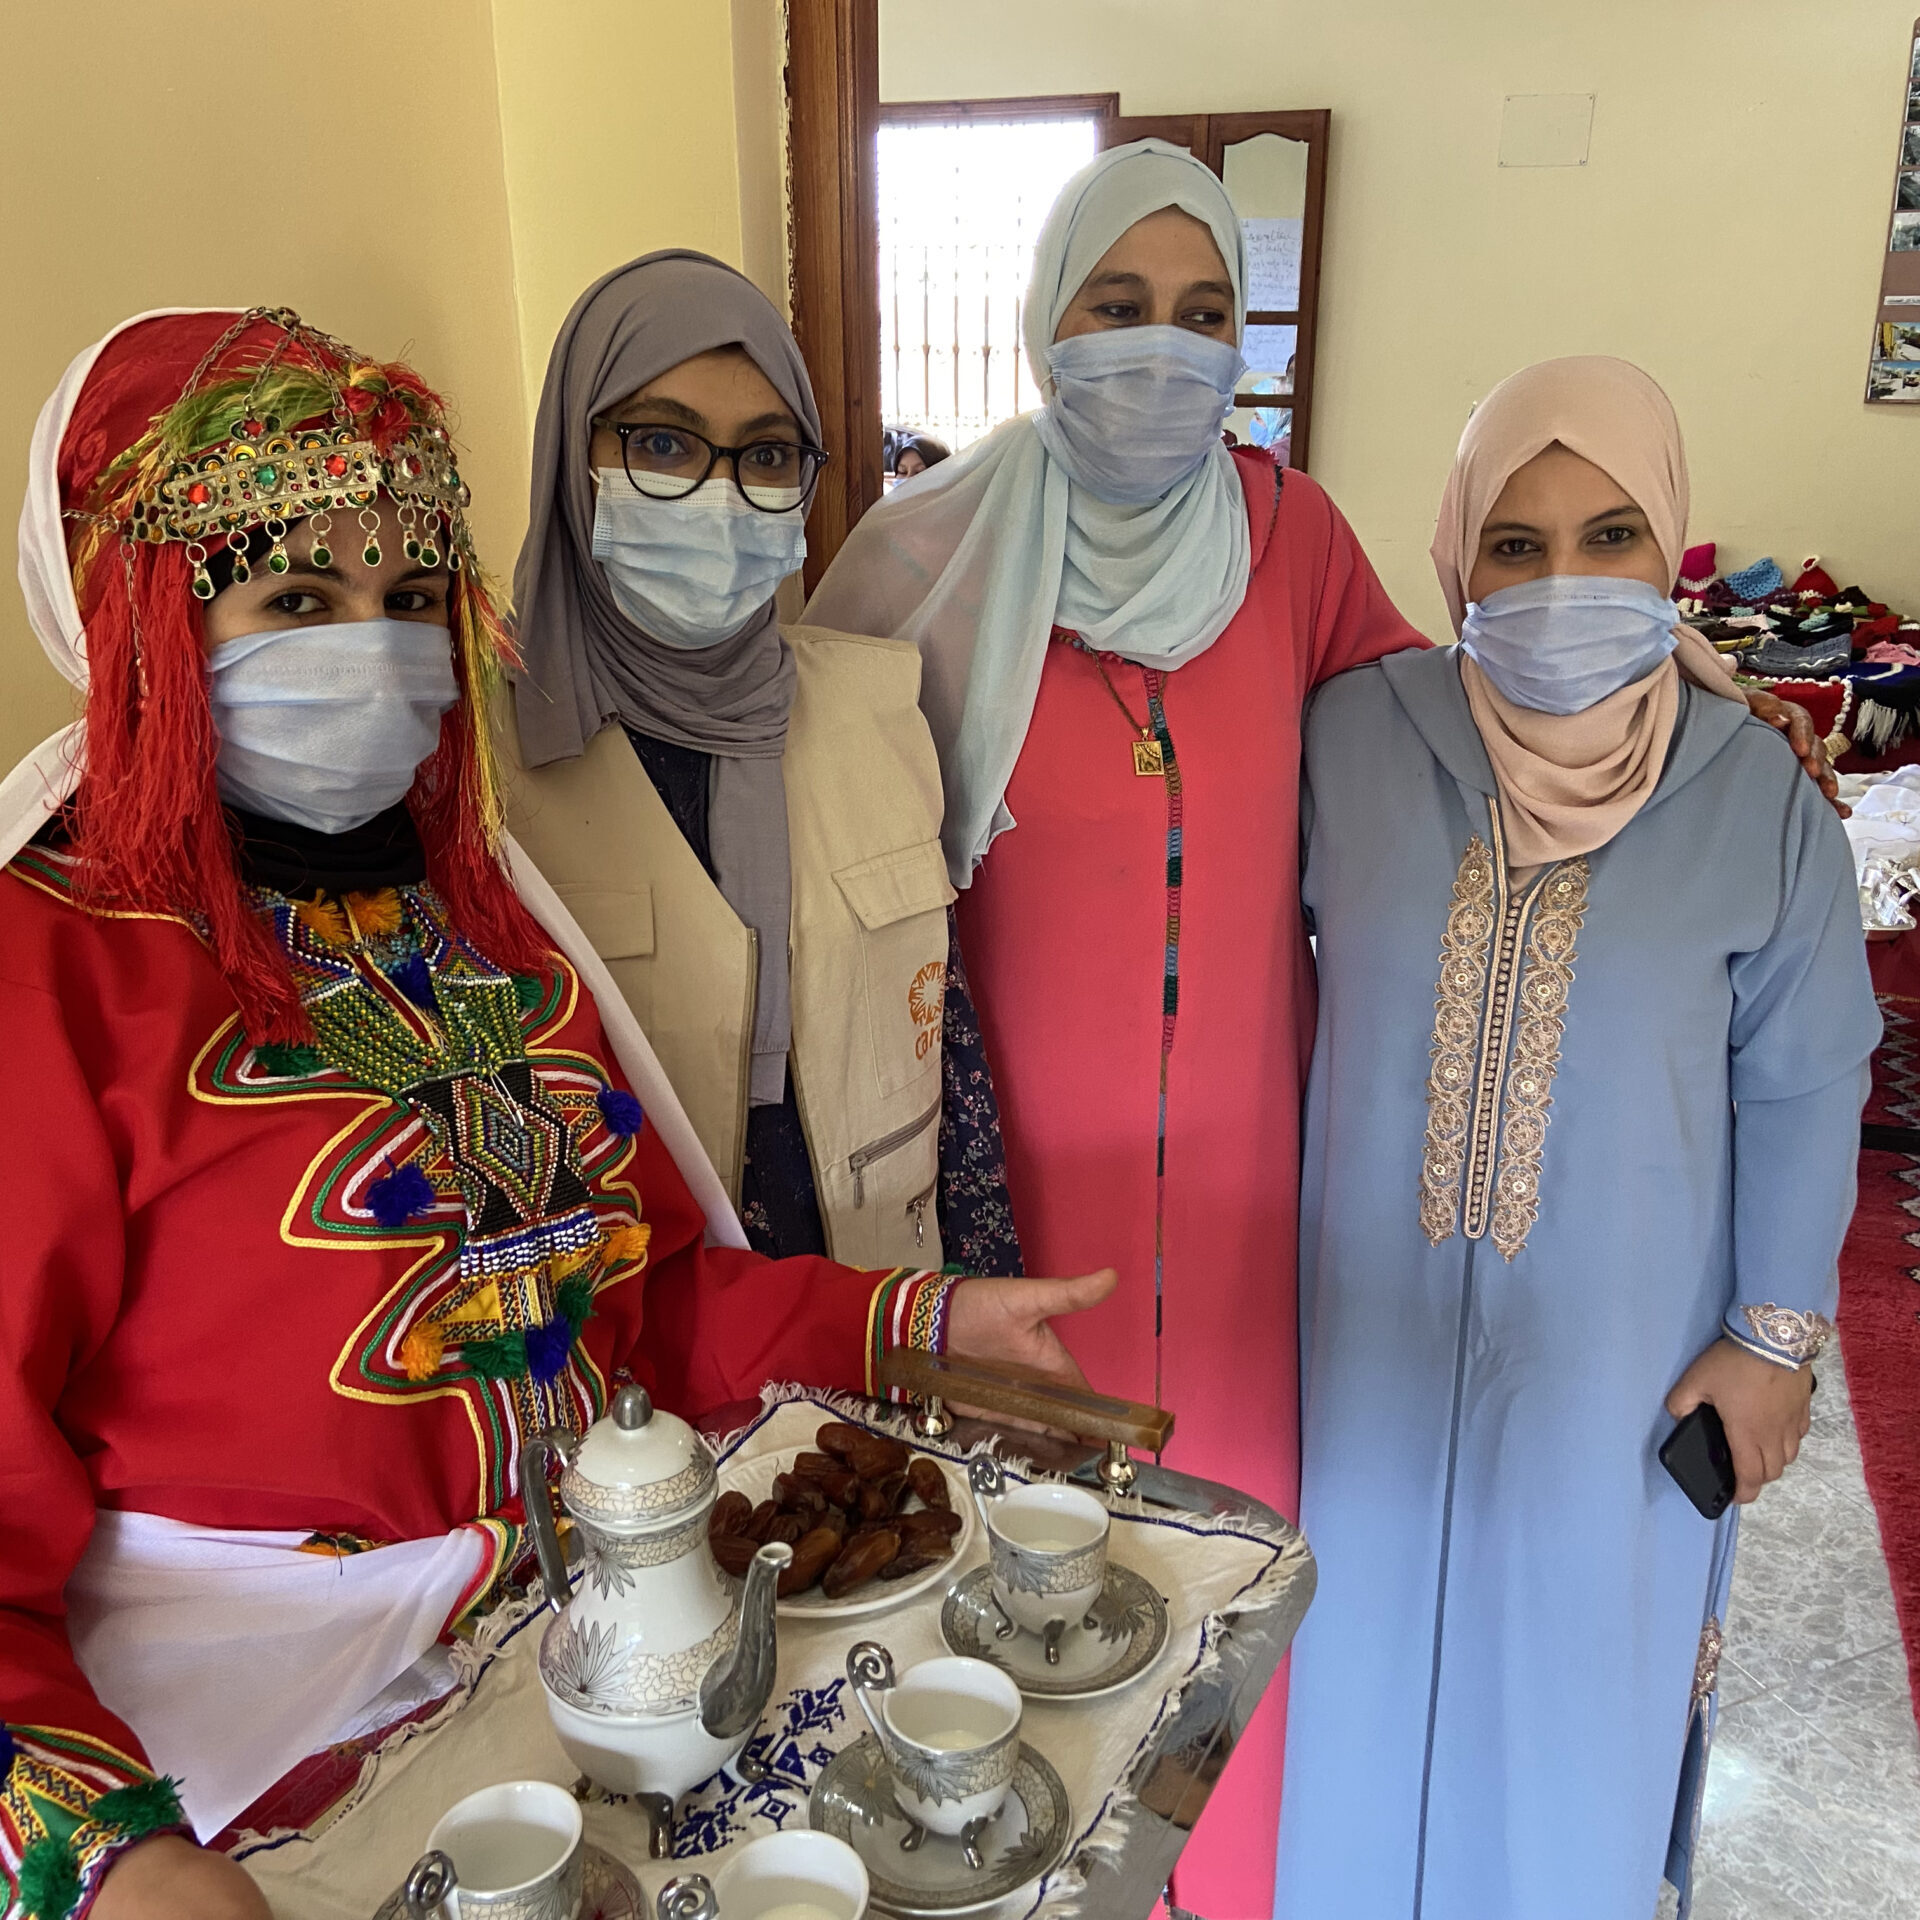 4 women standing together in a line for a photo. The woman on the far right is holding a tea tray with a tea pot and various items on it.